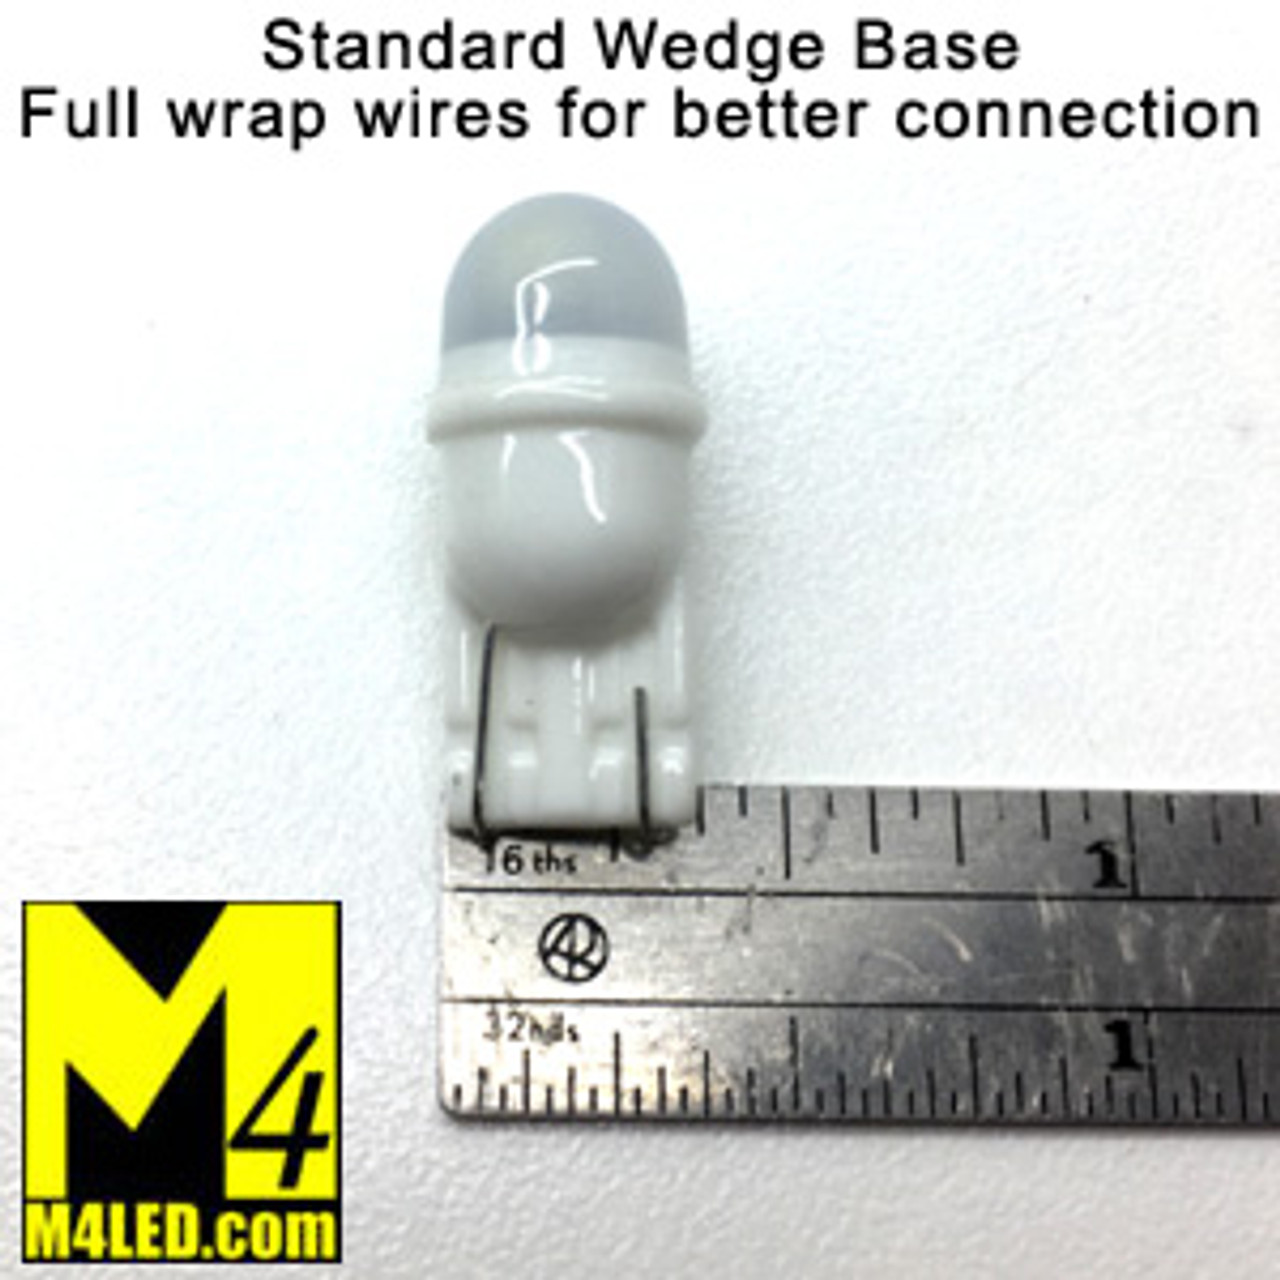 T10-3D-2-CW Cool White LED Light Bulb (#194 #168) with Wedge Base